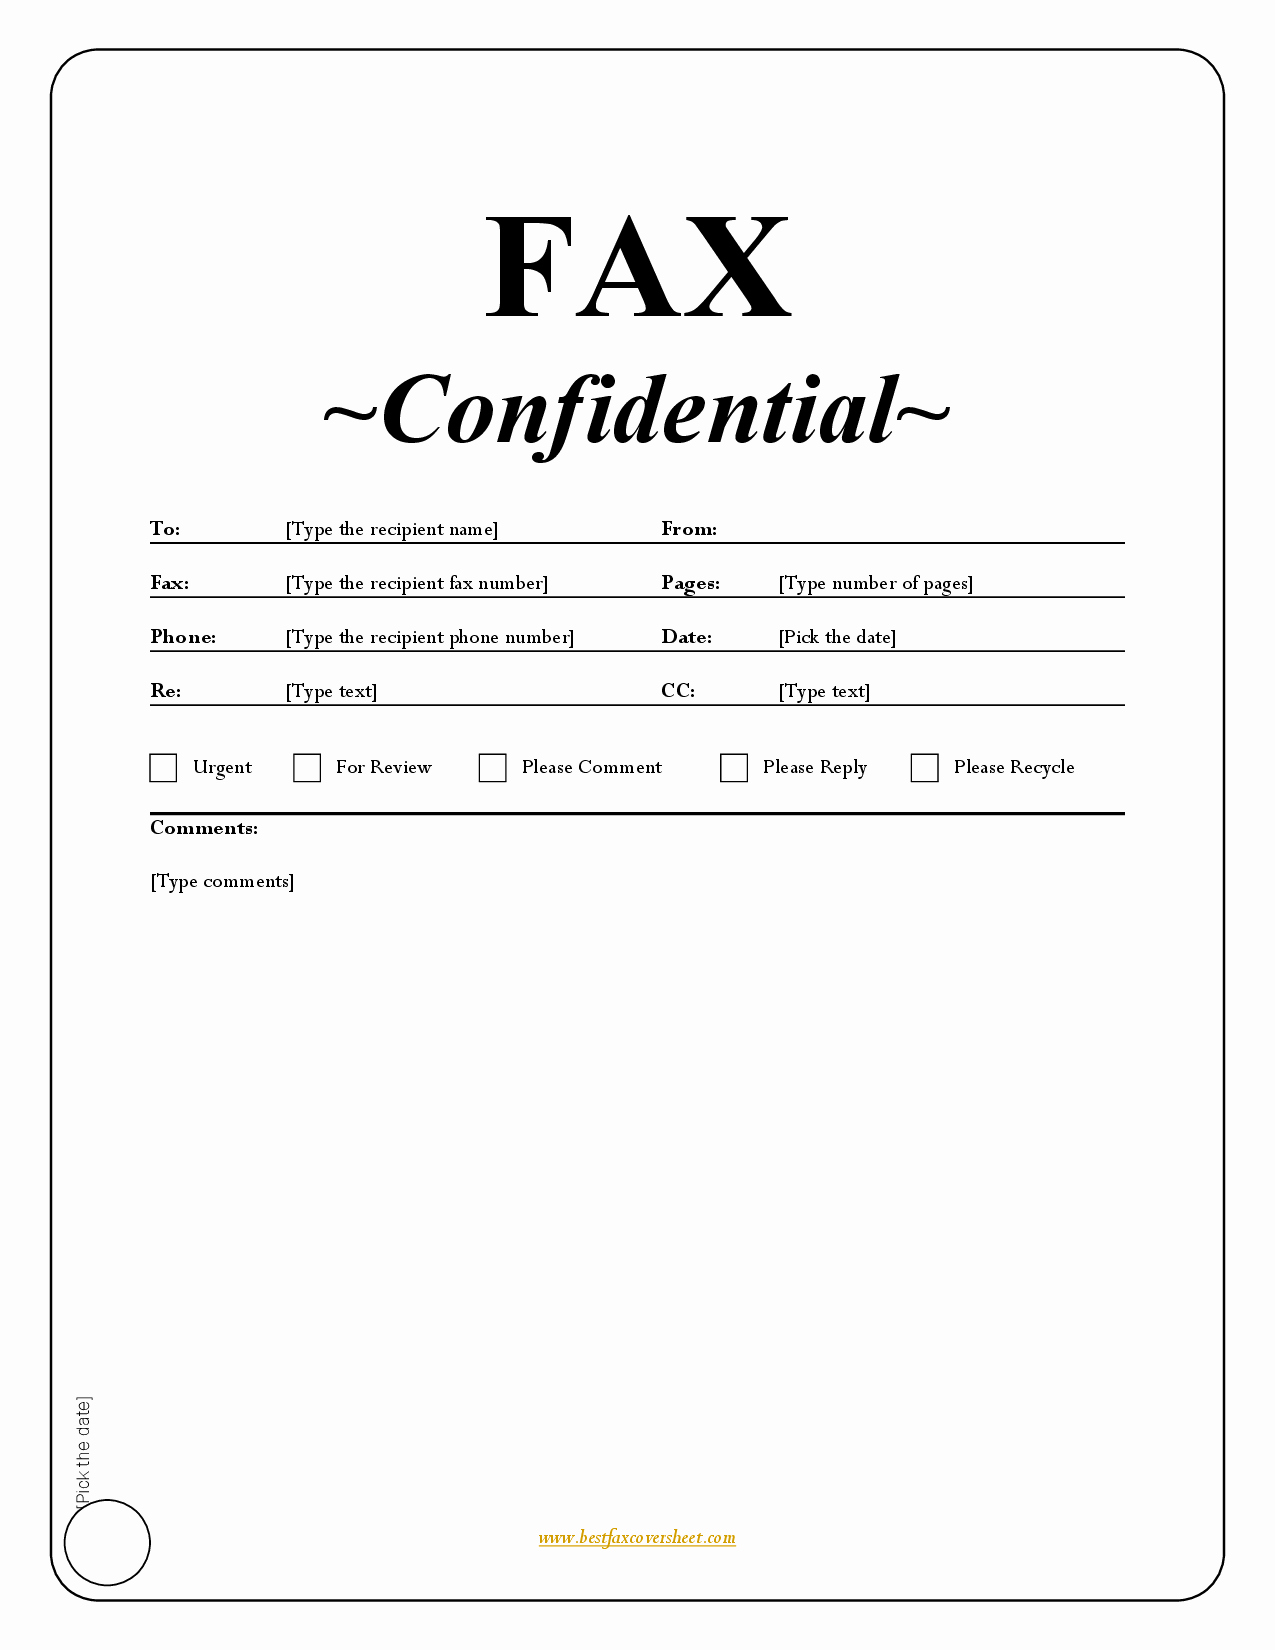 Cover Sheet for A Fax Fresh Printable Fax Cover Sheet with Confidentiality Statement